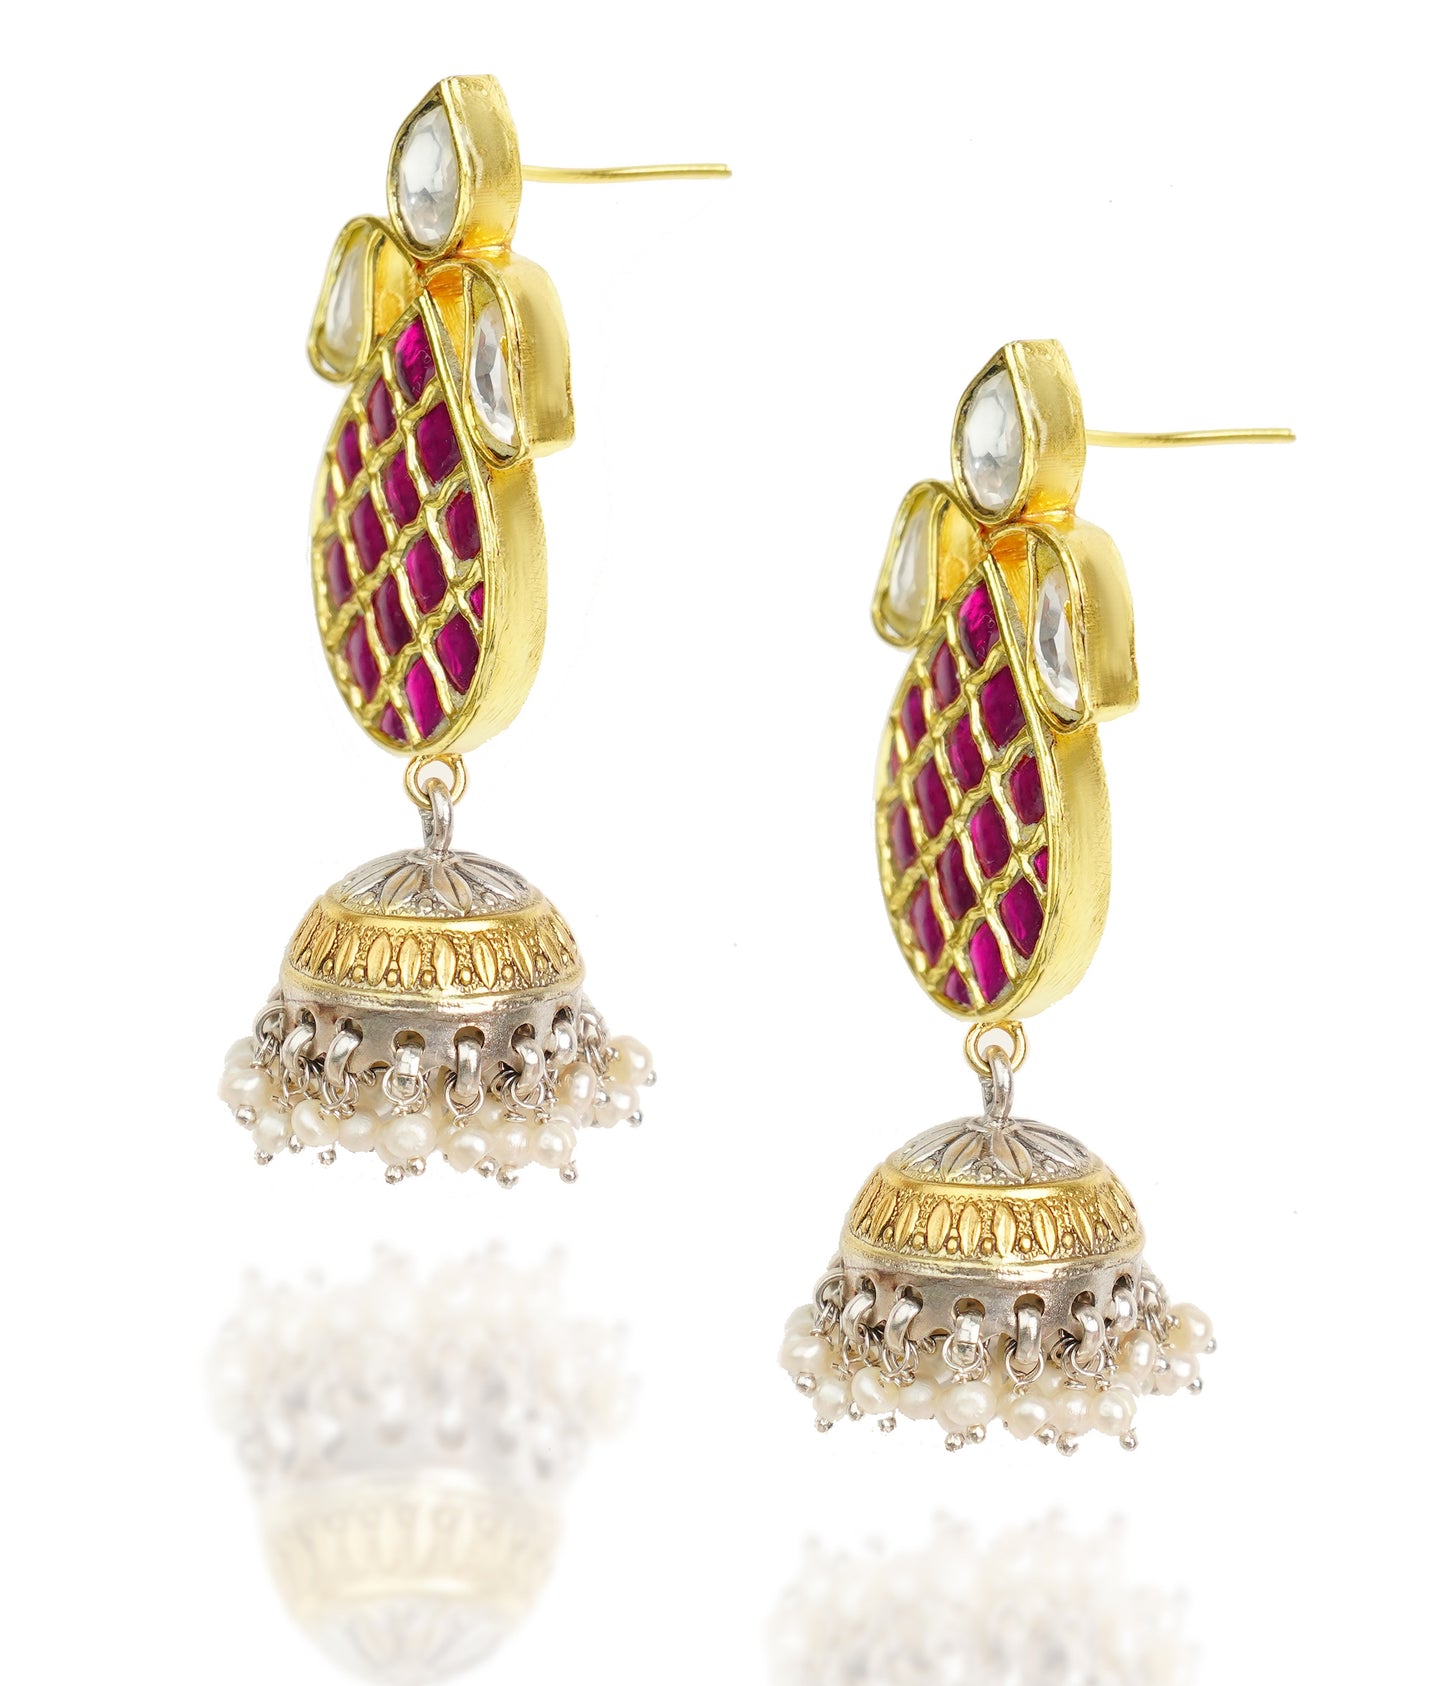 925 Silver Gold Plated White and Red Oval Jhumki Earrings - Neeta Boochra Jewellery